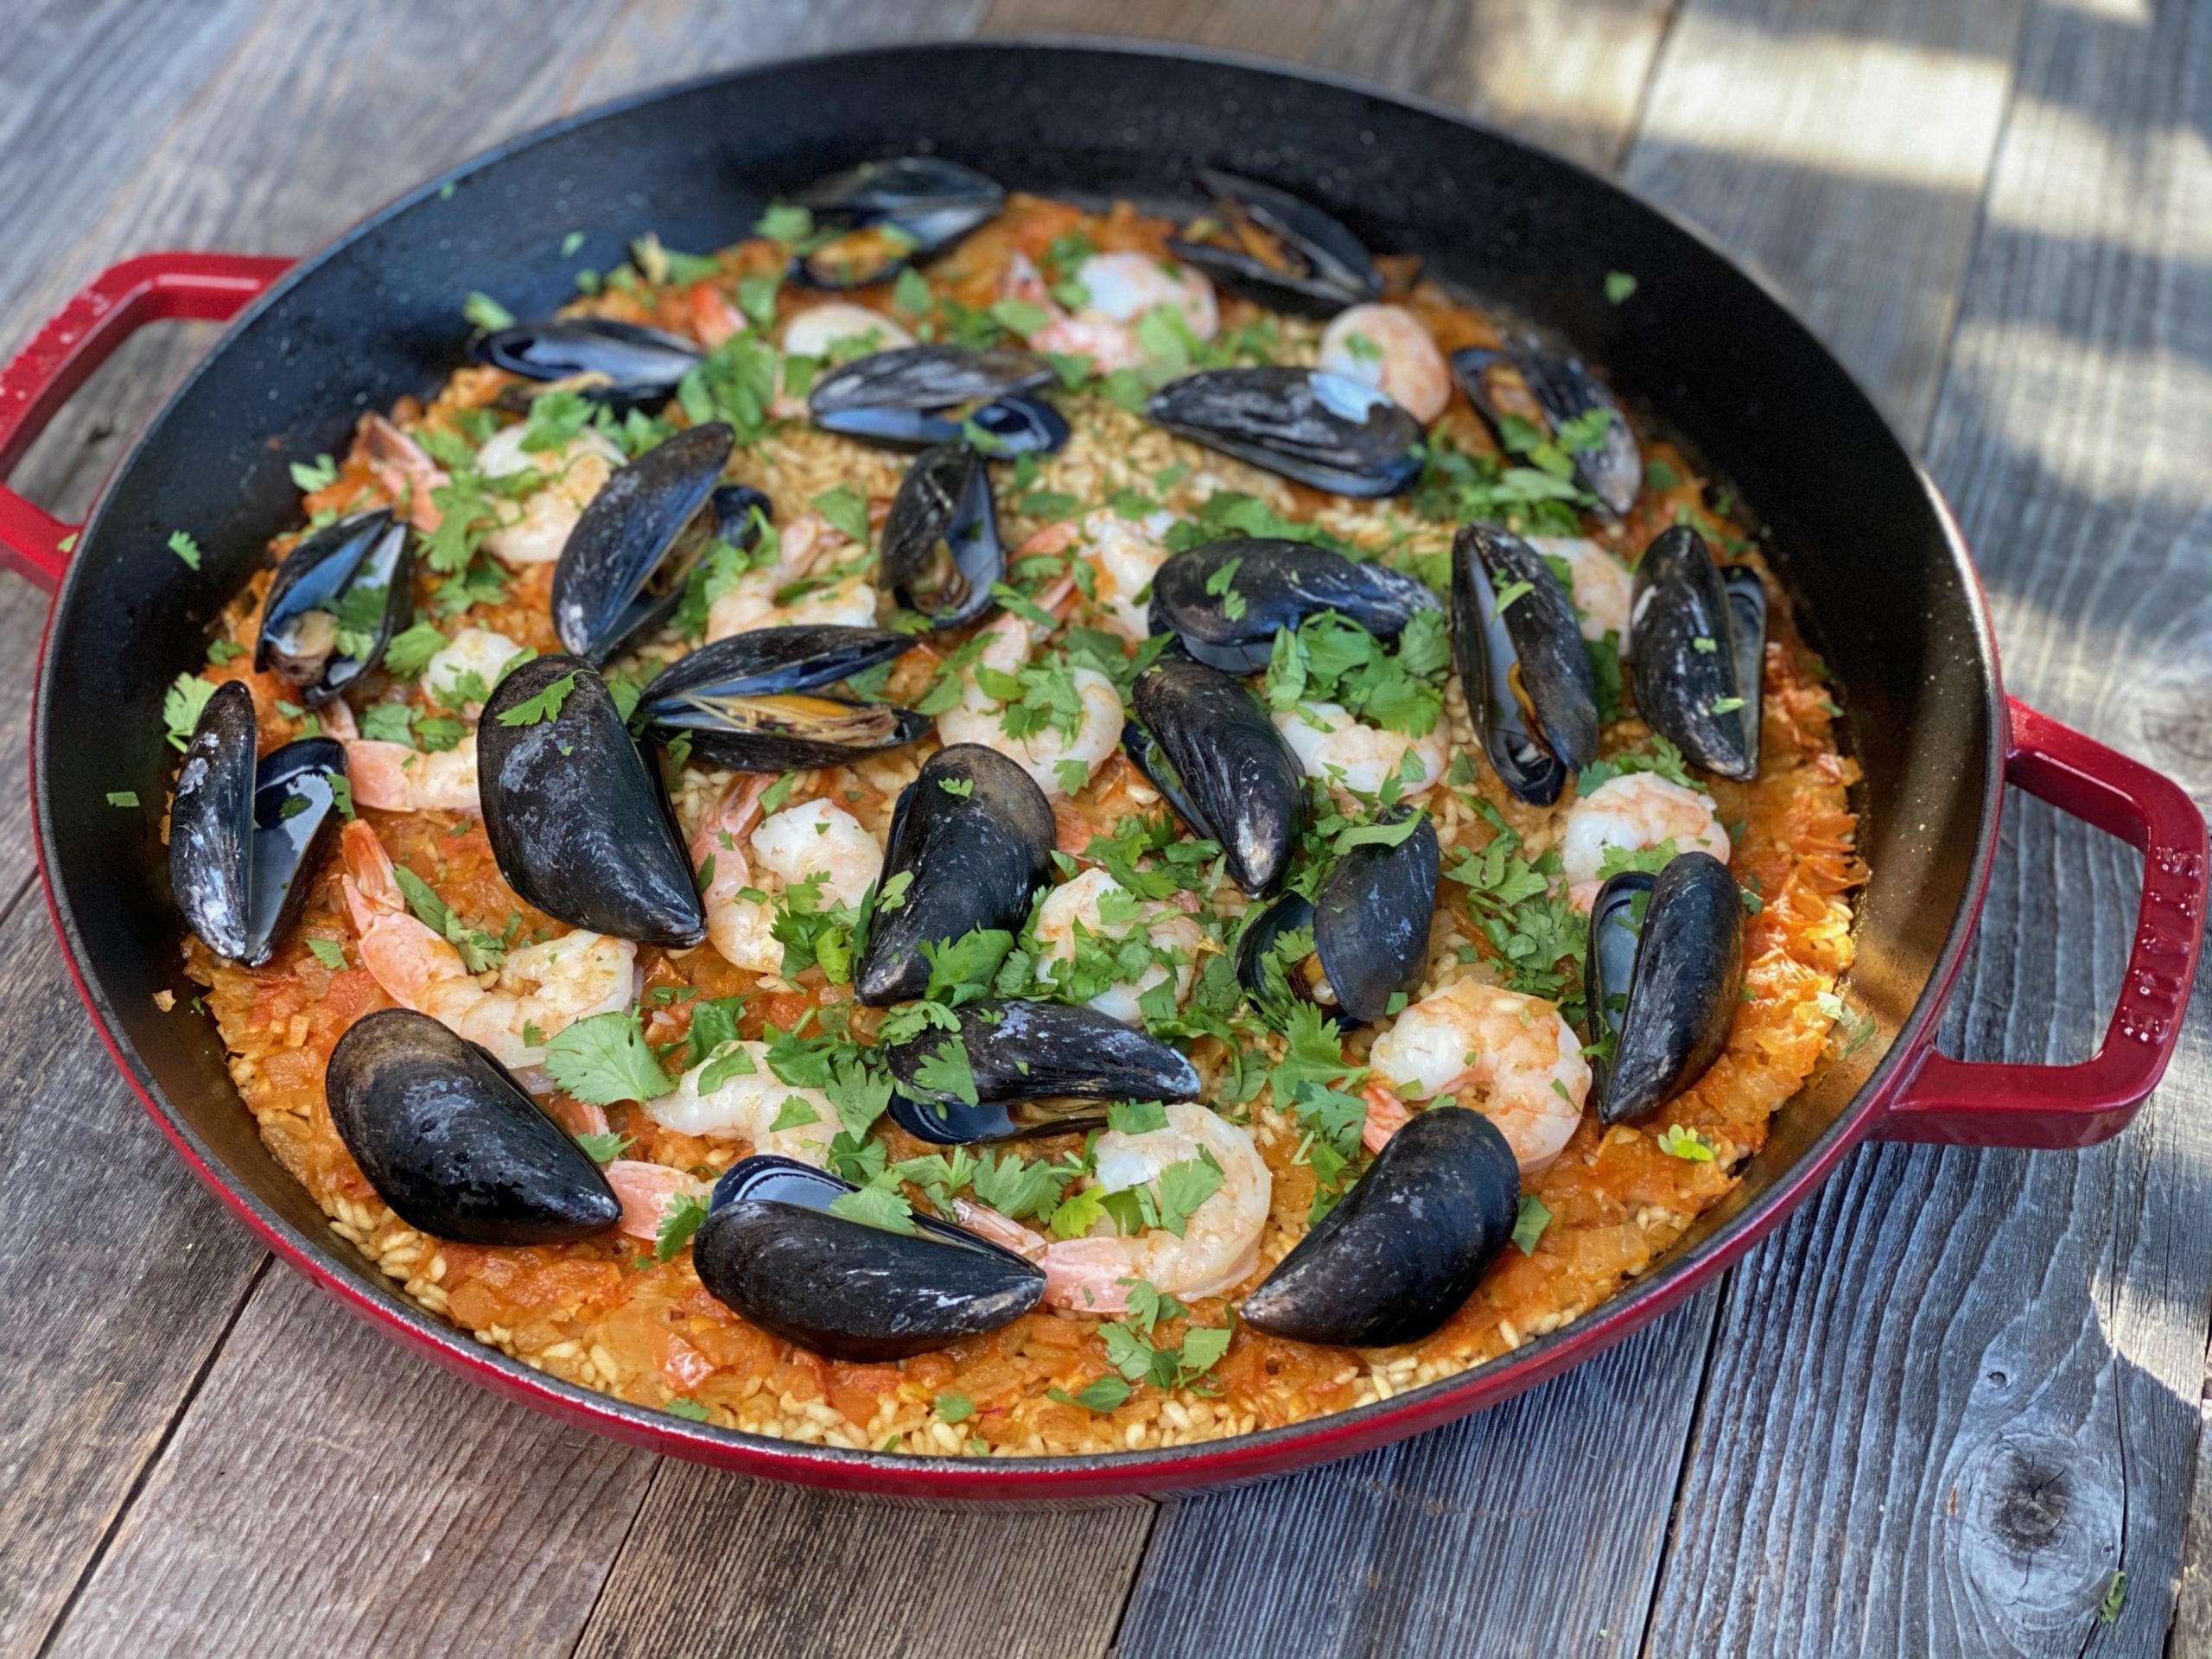 The Best Paella Pans in 2022